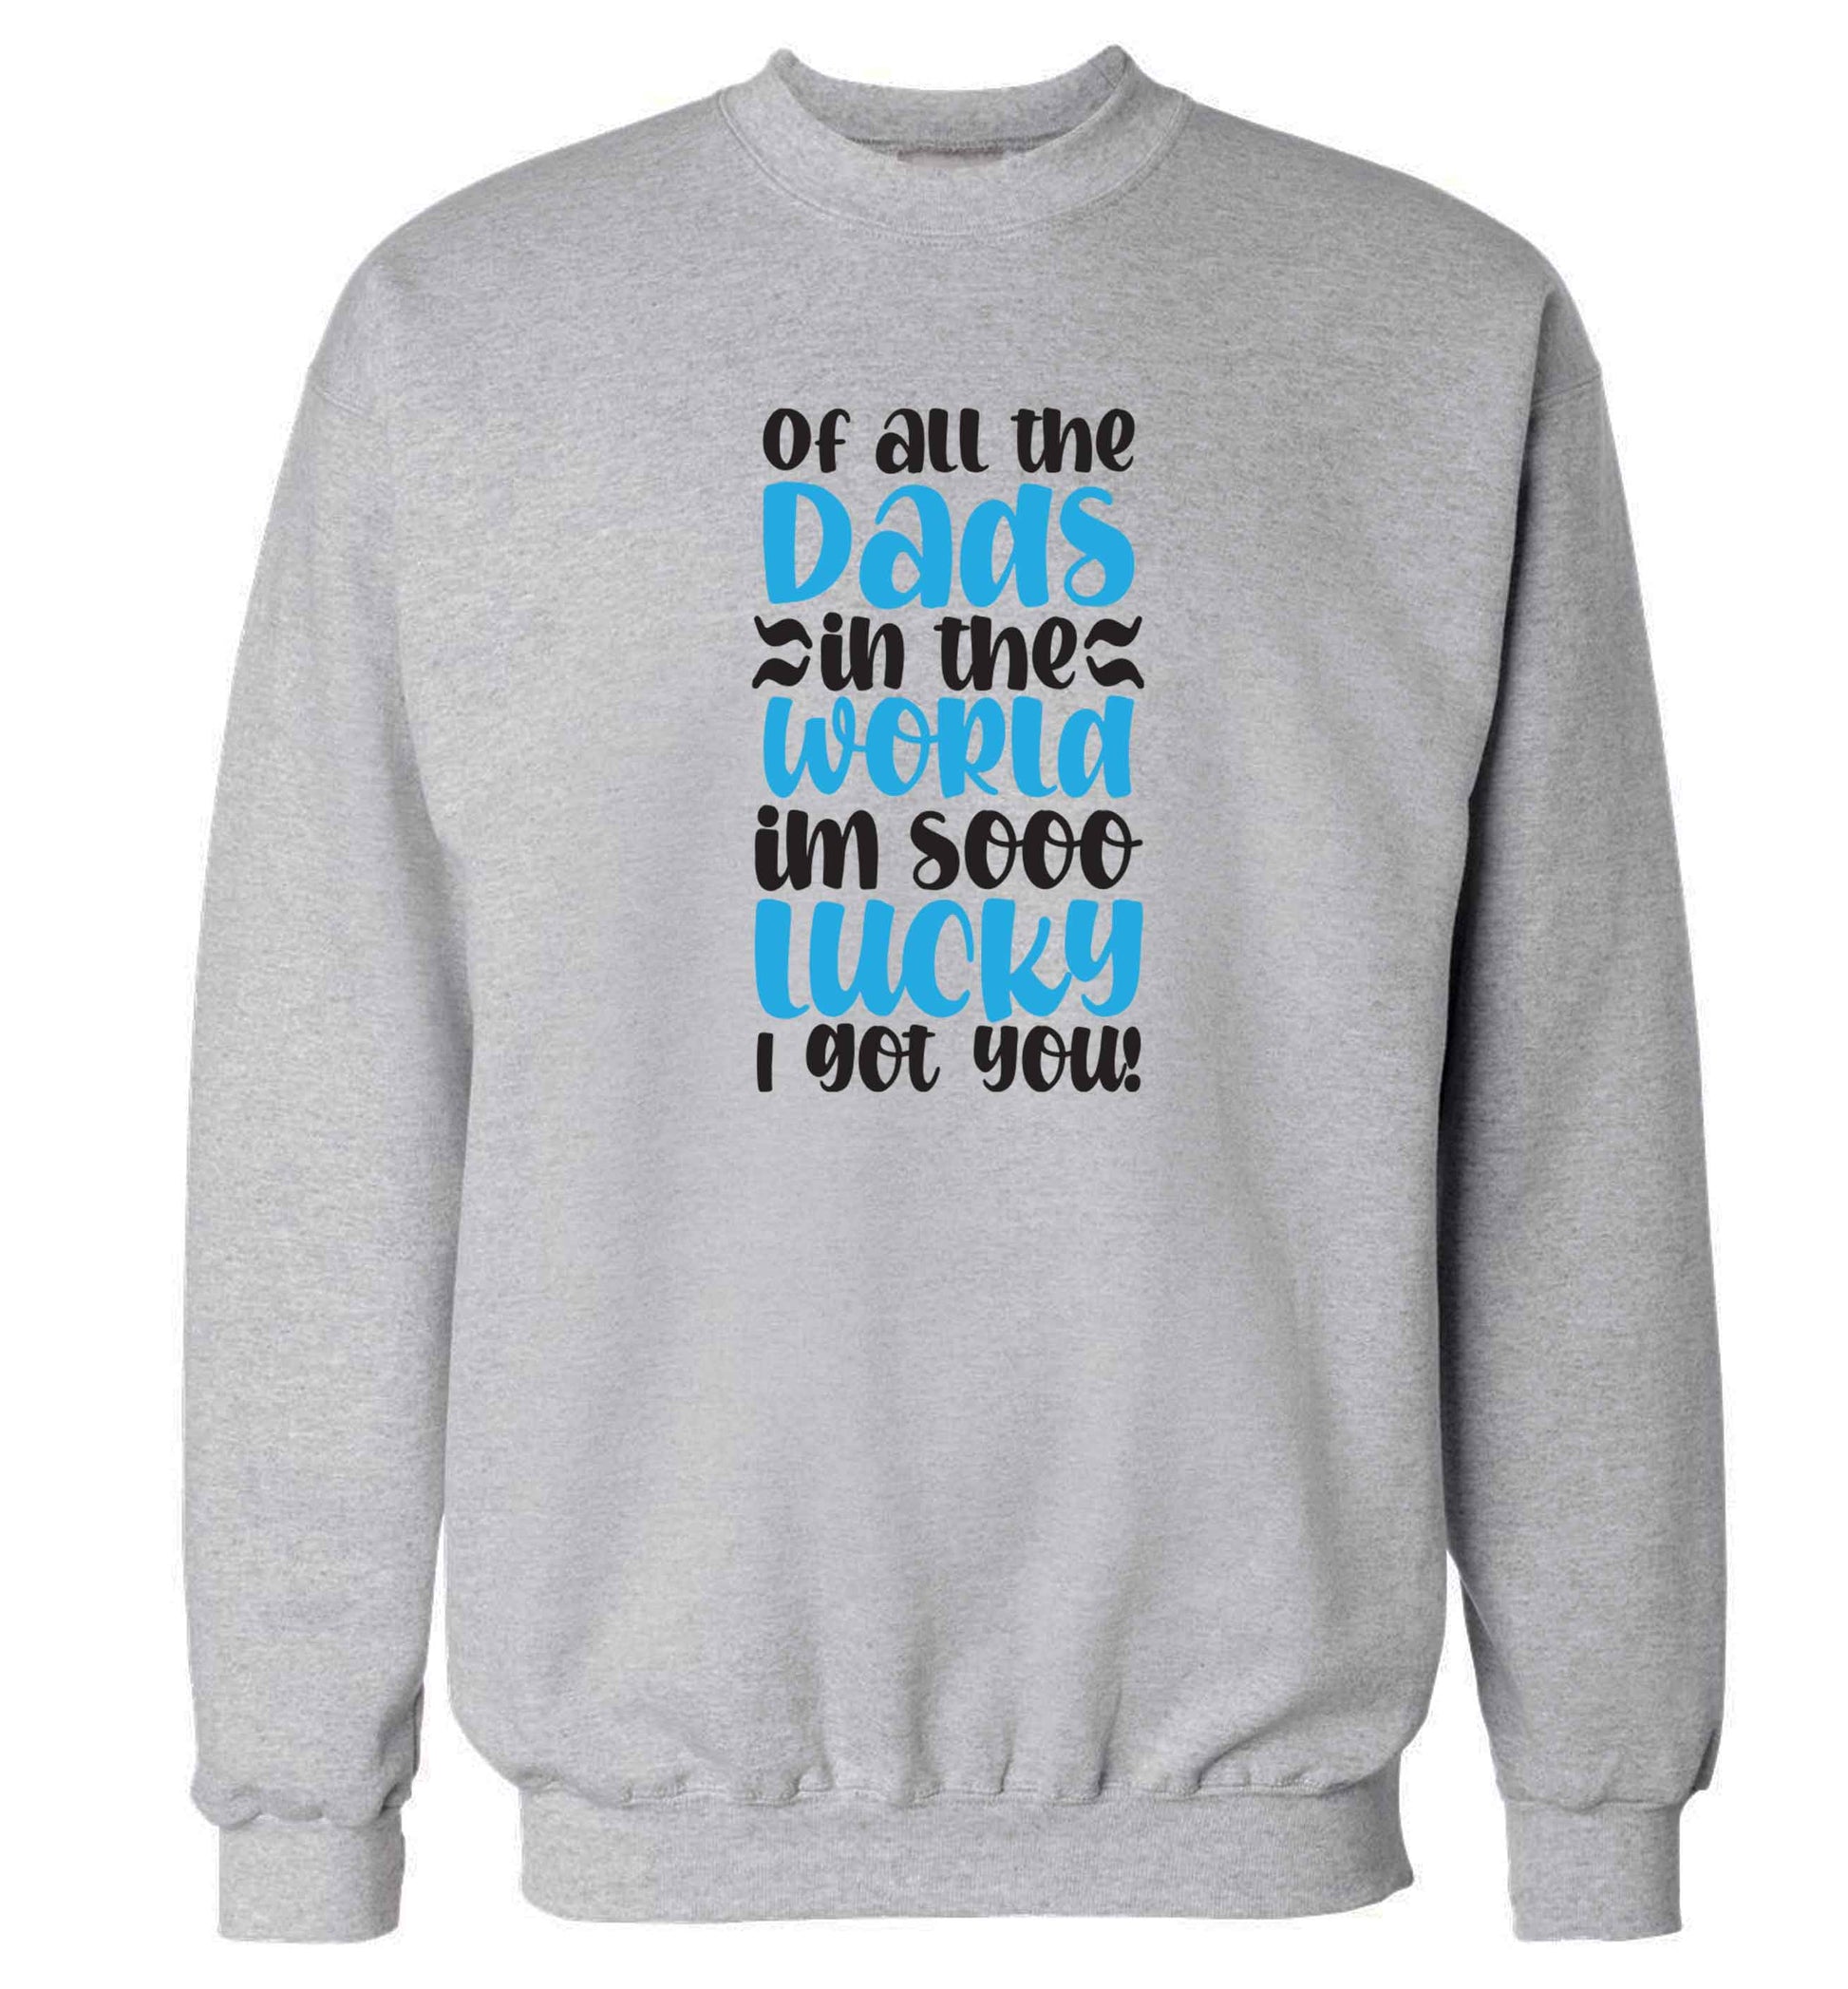 Of all the Dads in the world I'm so lucky I got you adult's unisex grey sweater 2XL